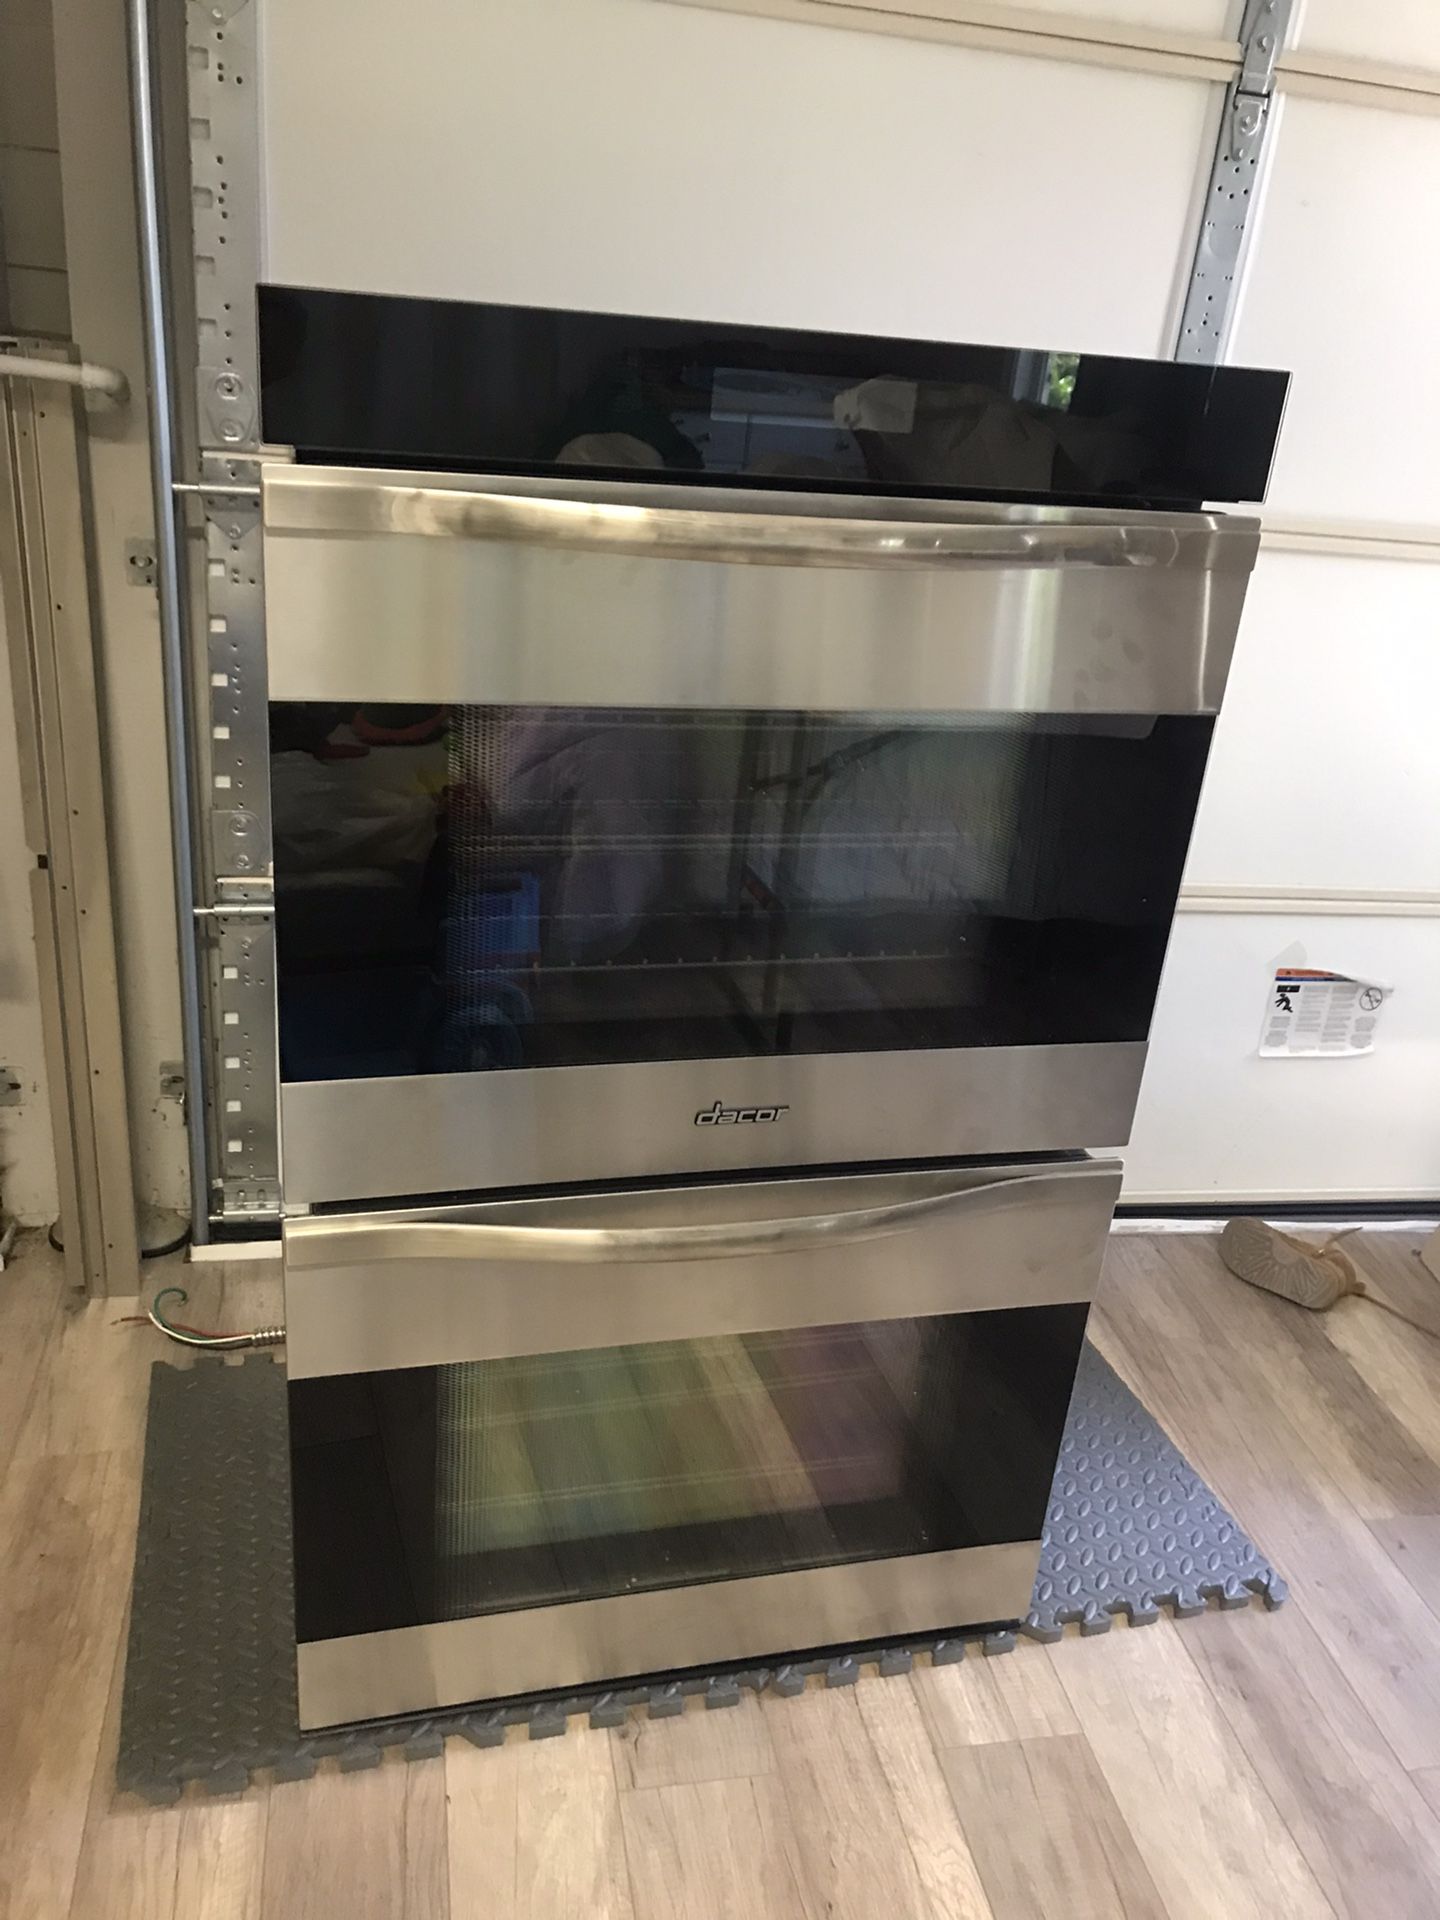 30 Inch Double Wall Oven ( DACOR )